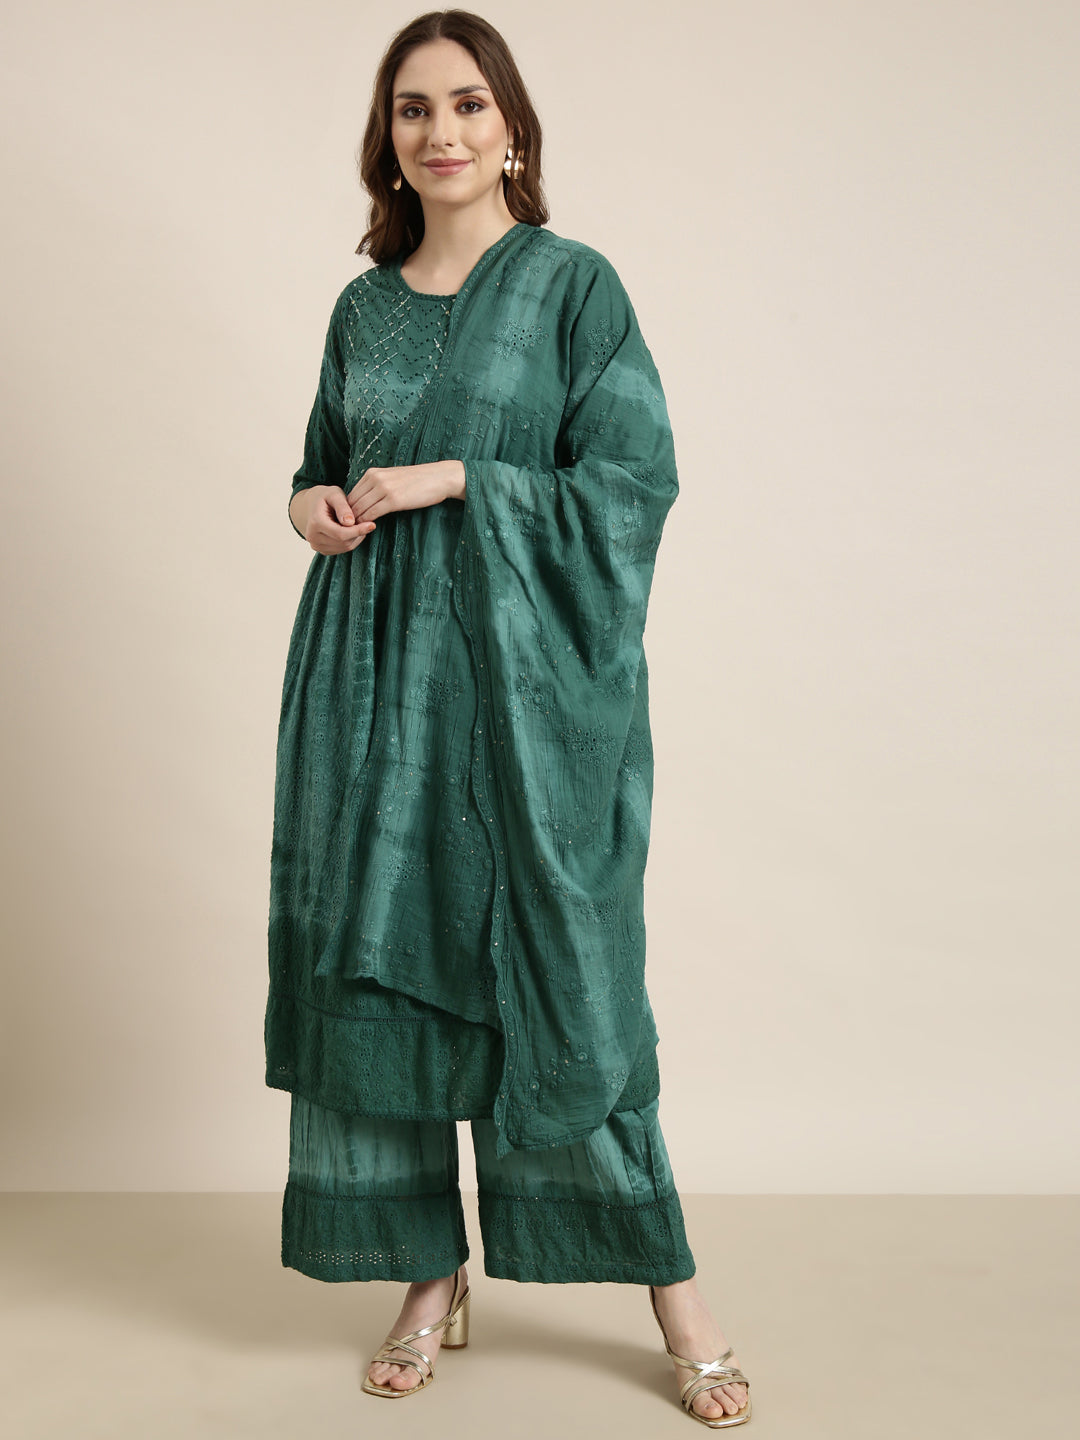 Women A-Line Sea Green Ombre Kurta and Trousers Set Comes With Dupatta and Potli Bag